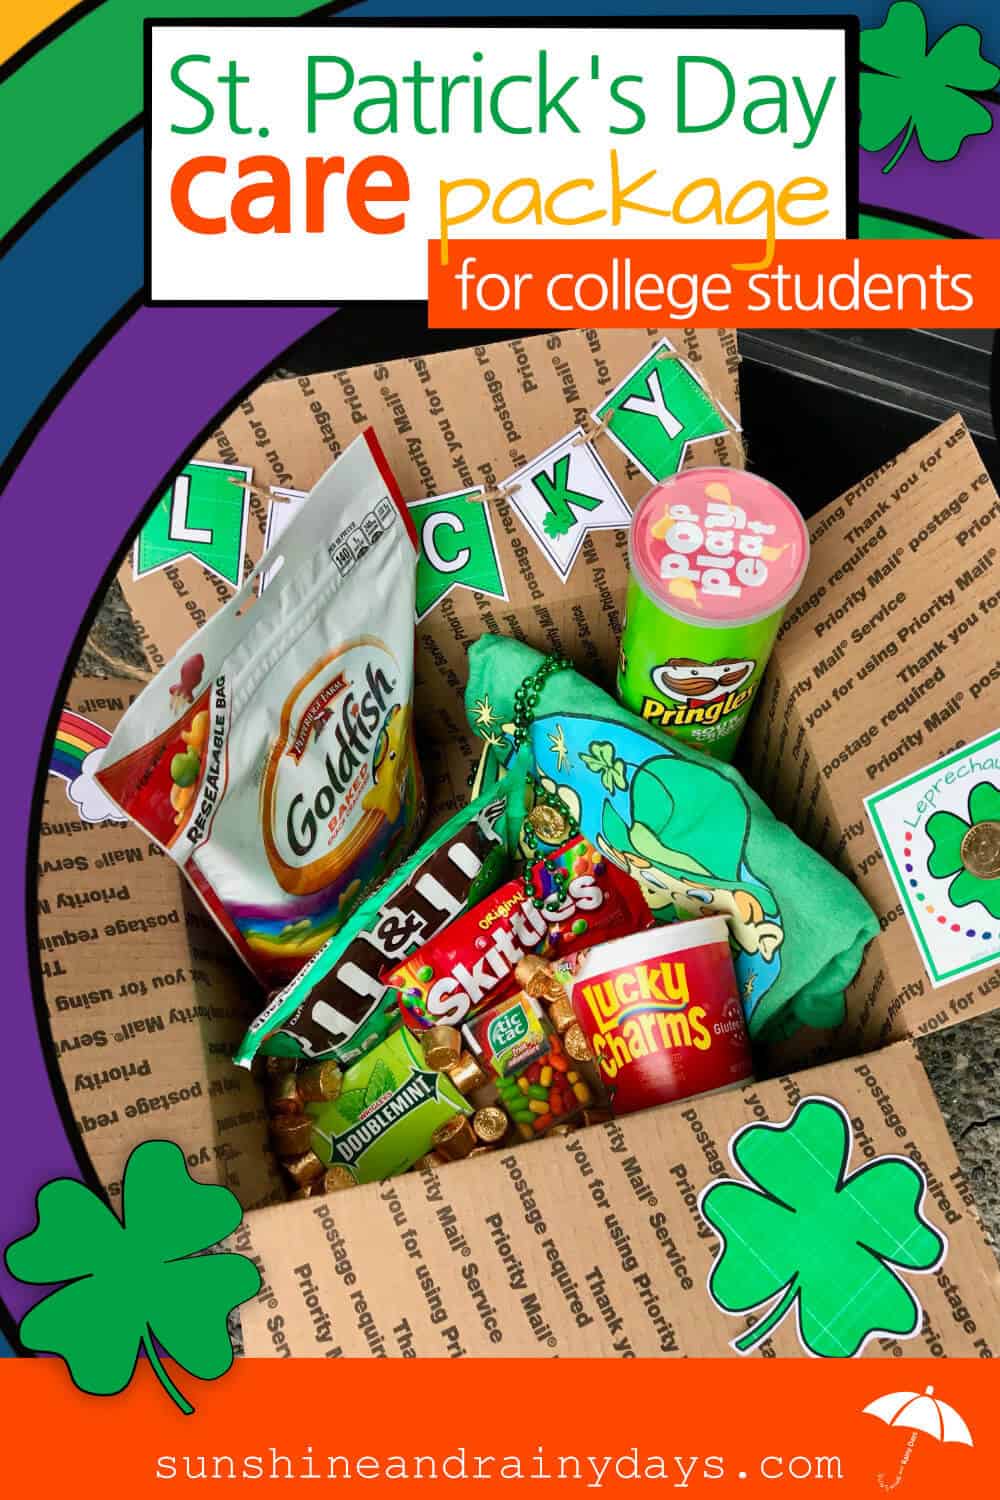 Help your college student celebrate St. Patrick's Day with a St. Patrick's Day Care Package!